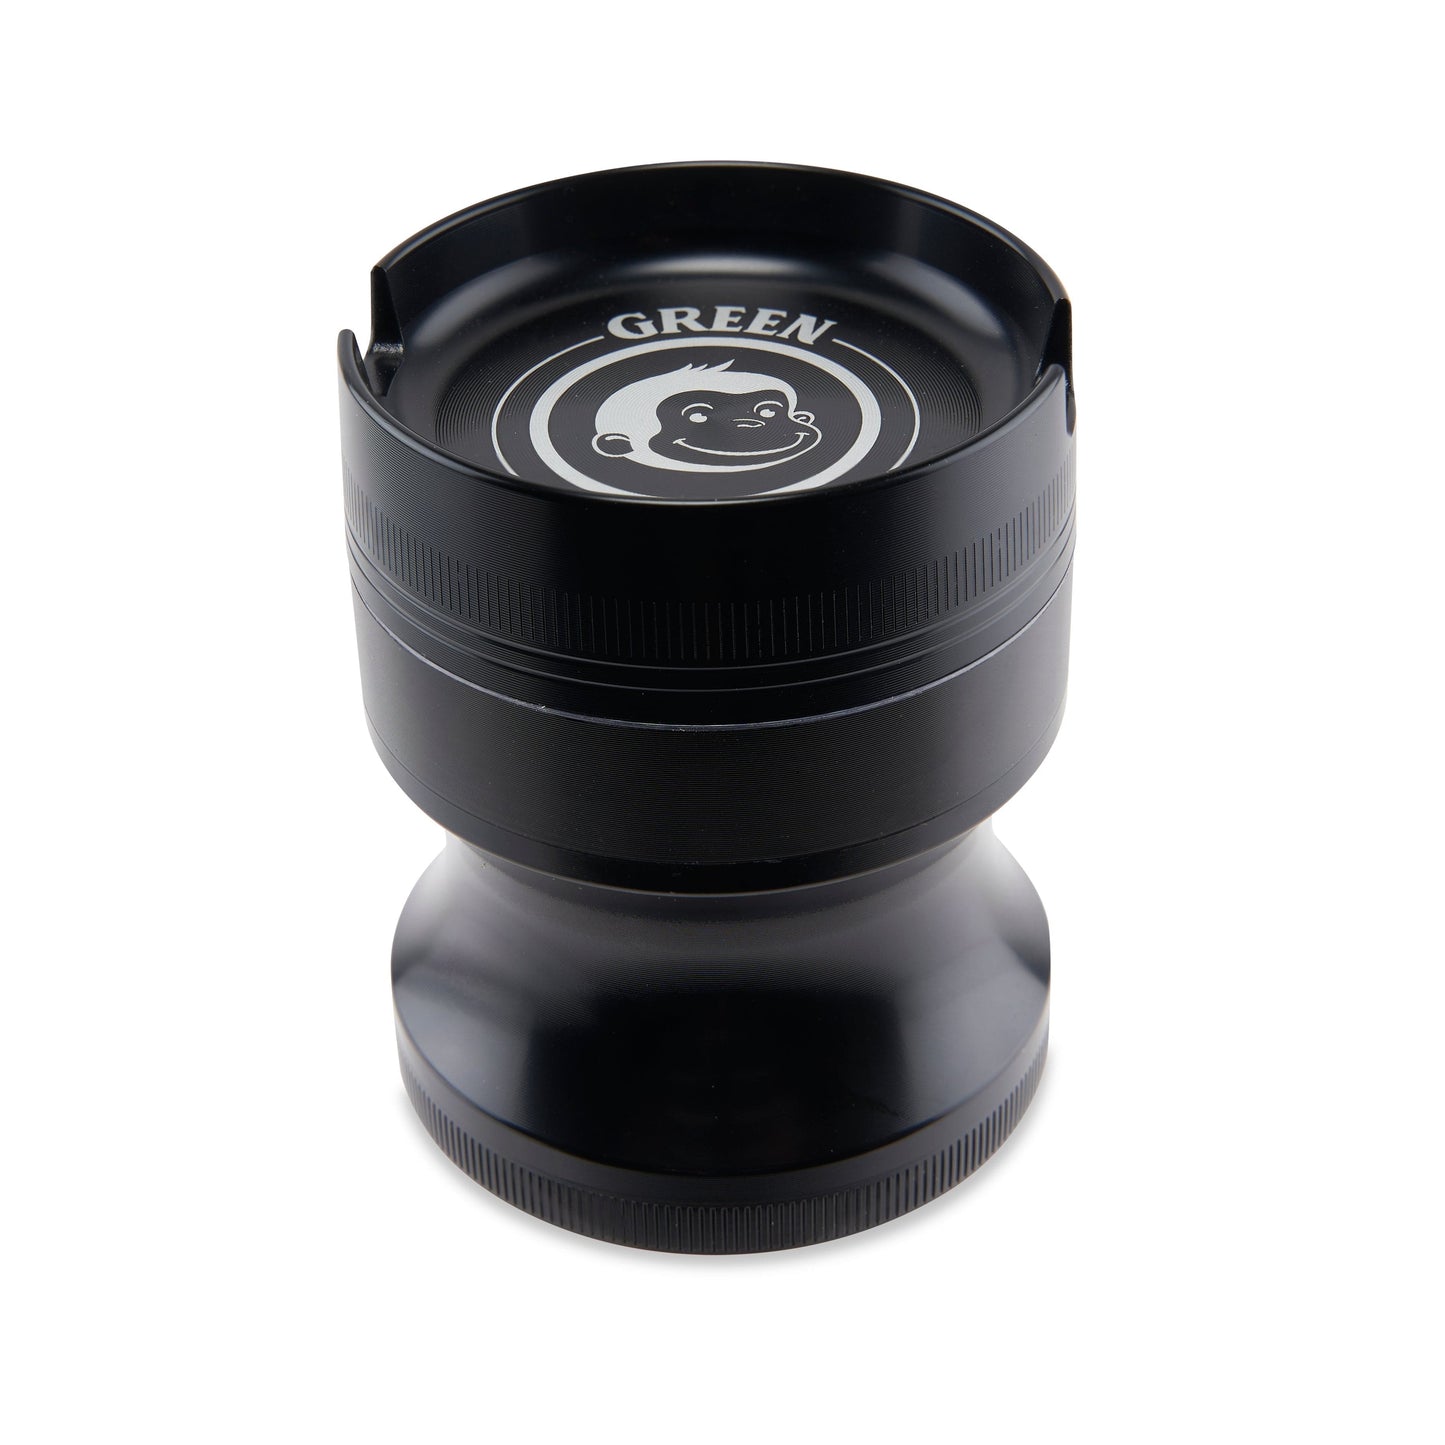 Green Monkey Grinders Black Chacma 63mm Magnetic Grinder with Ashtray